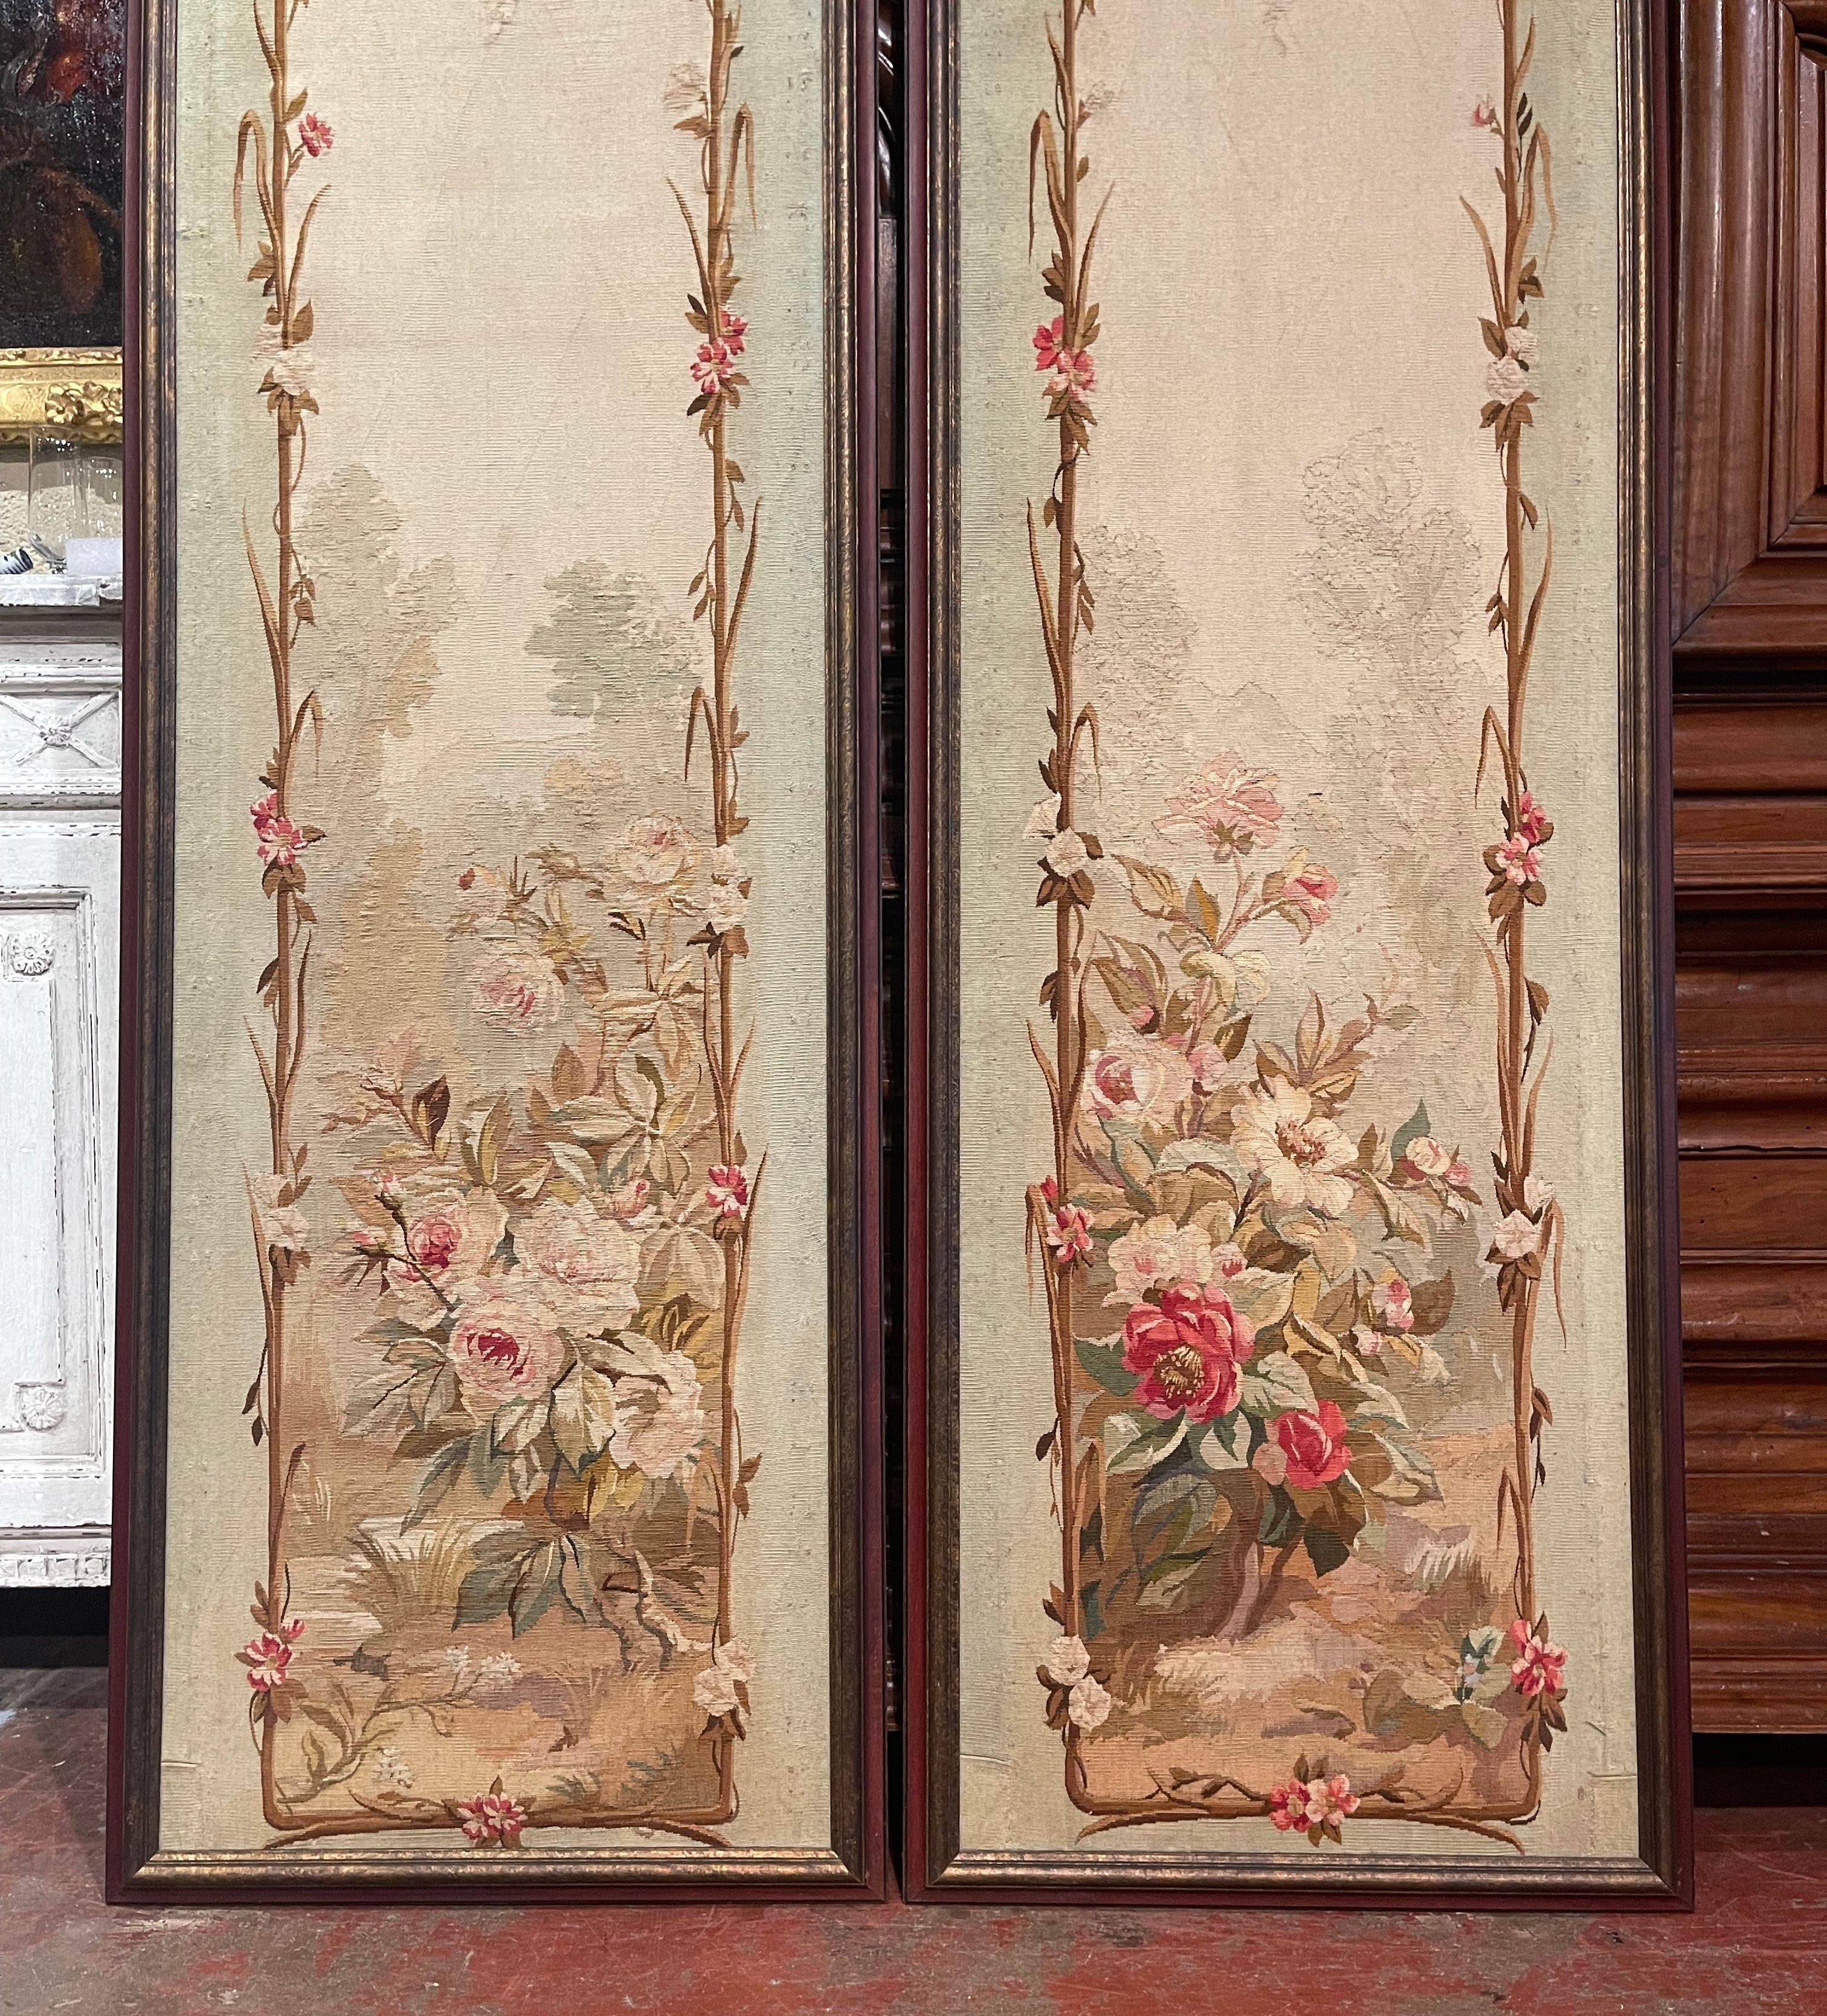 Hand-Woven Pair of Mid-19th Century French Framed Handwoven Aubusson Wall Hanging Portieres